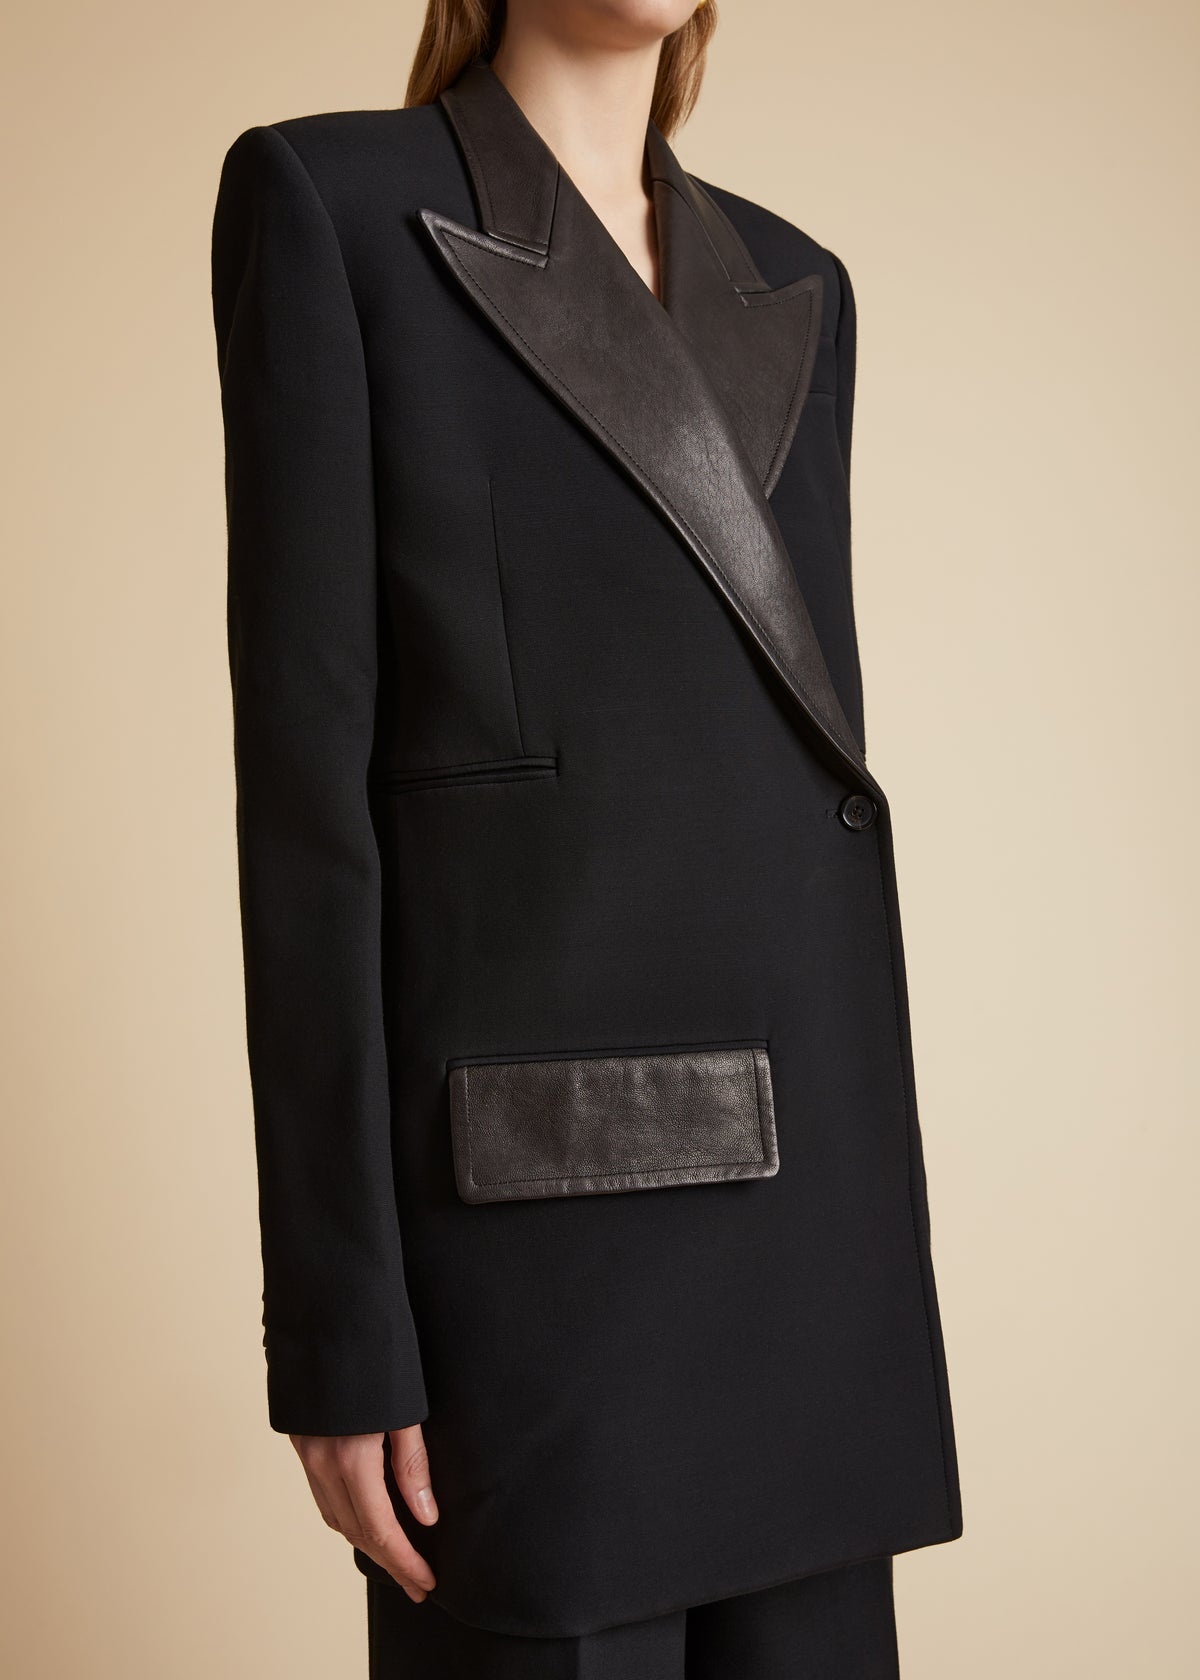 The Jacobson Blazer in Black Leather Combo - 4